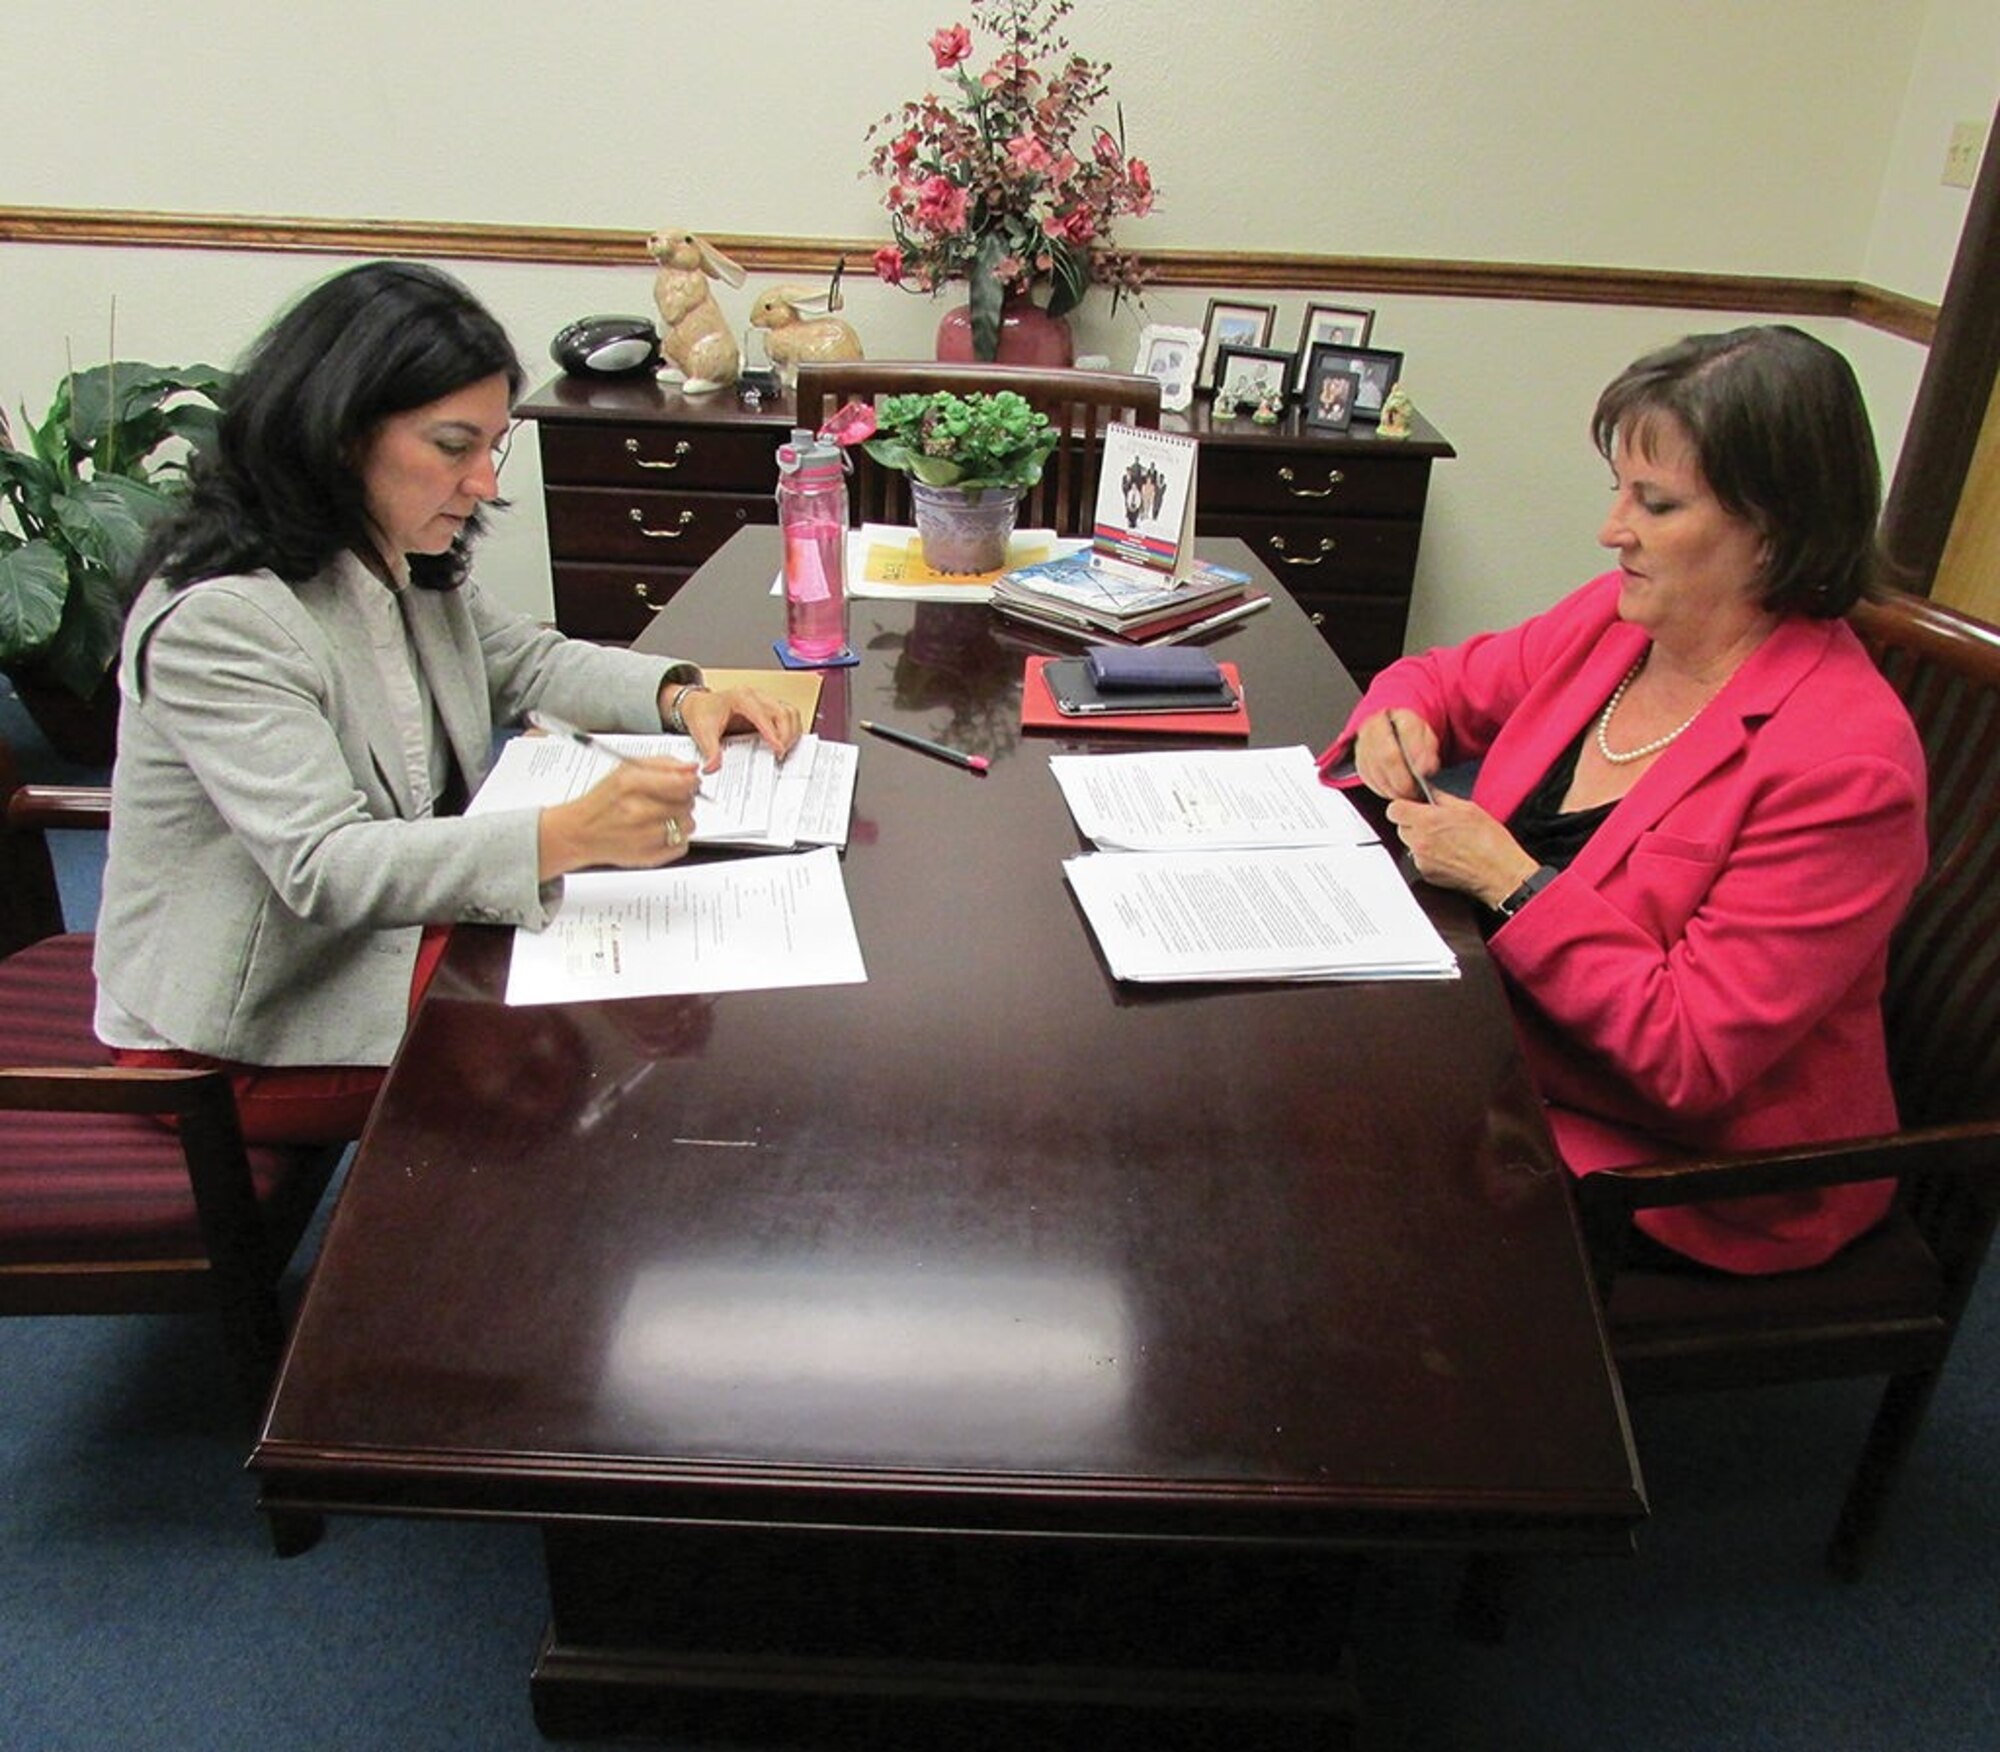 Cindy Dominguez-Trujillo, left, and Casey Anglada DeRaad, special assistants to the commander of the 377th Air Base Wing and executive director of the Air Force Nuclear Weapons Center, respectively, talk about increasing diversity on base in the office of Dominguez-Trujillo.
